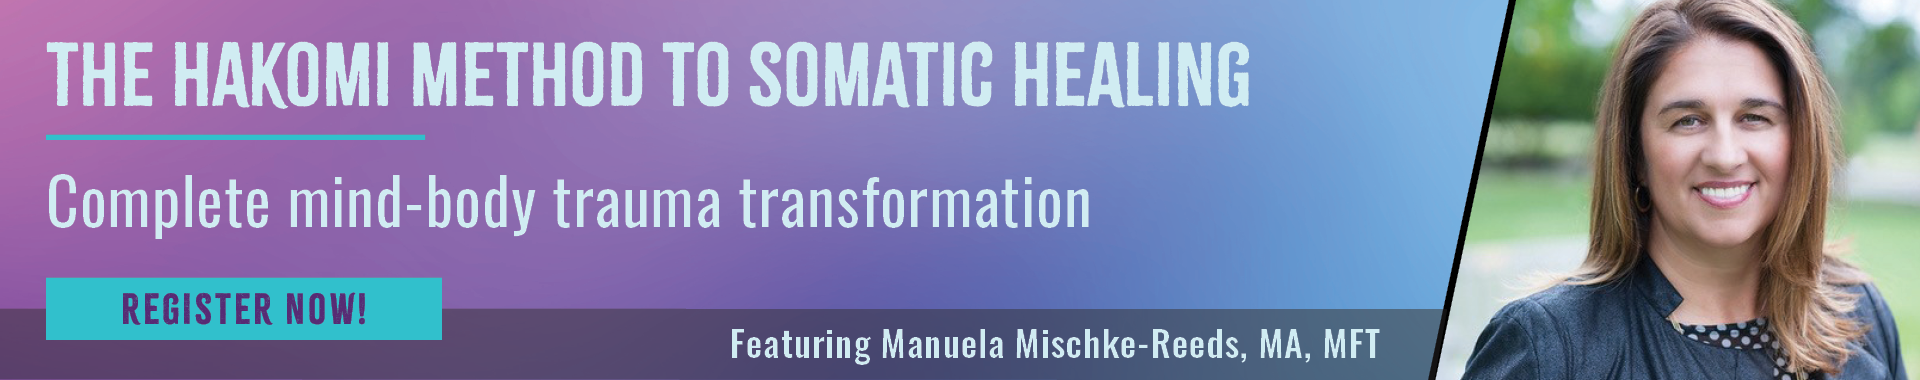 The Hakomi Method to Somatic Healing: Complete mind-body trauma transformation with Manuela Mischke-Reeds